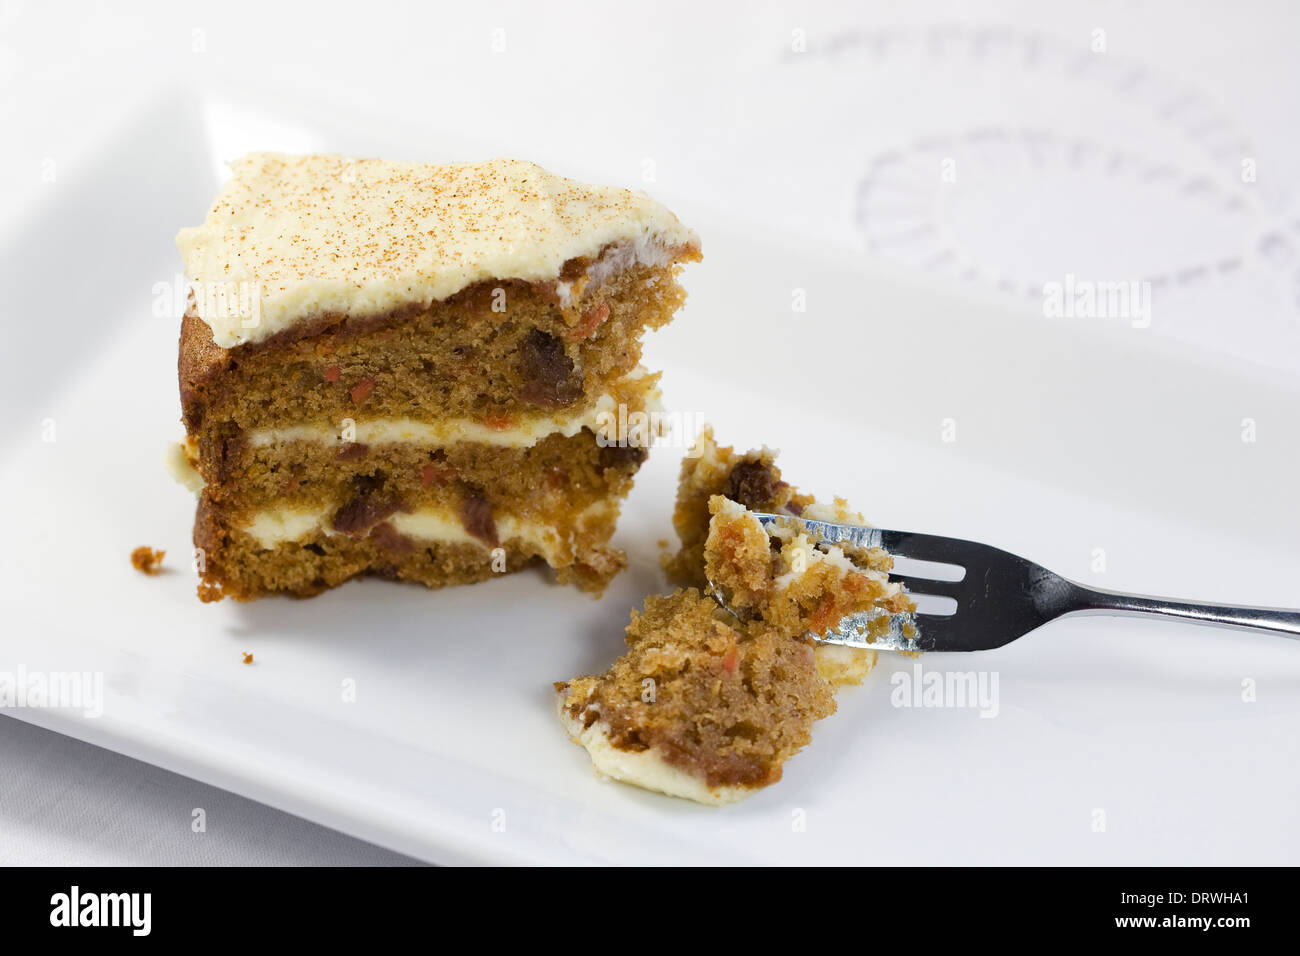 Homemade carrot cake on a white serving plate. Stock Photo